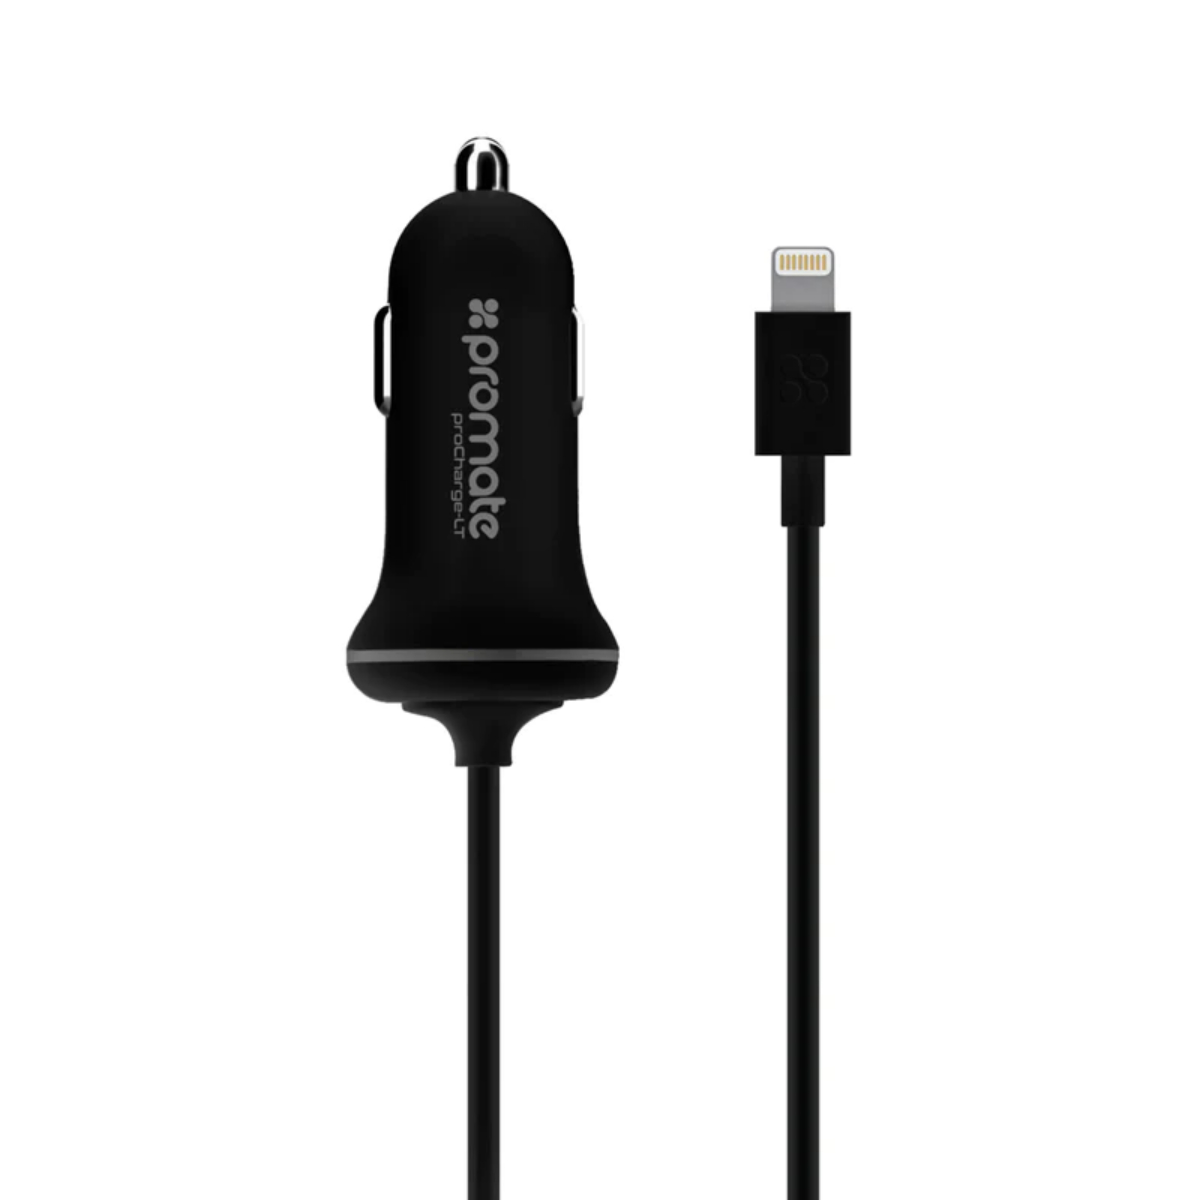 2100 mA Apple MFI Lightning car charger for iPad, iPhone and iPod., BLACK